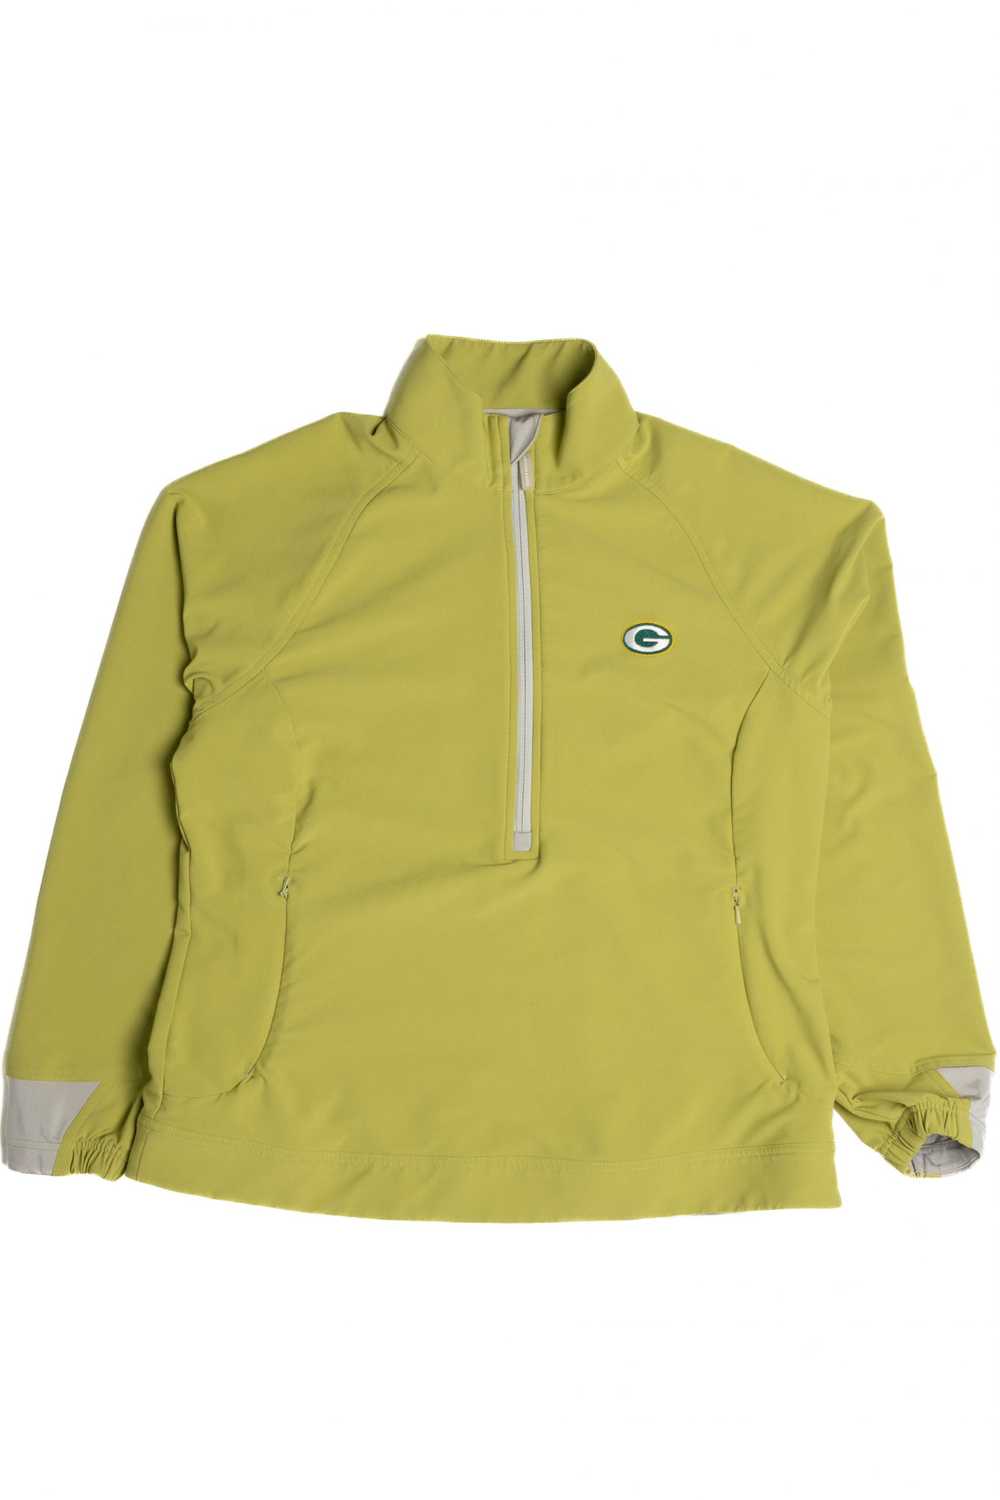 Green Bay Packers Lightweight Jacket - image 2